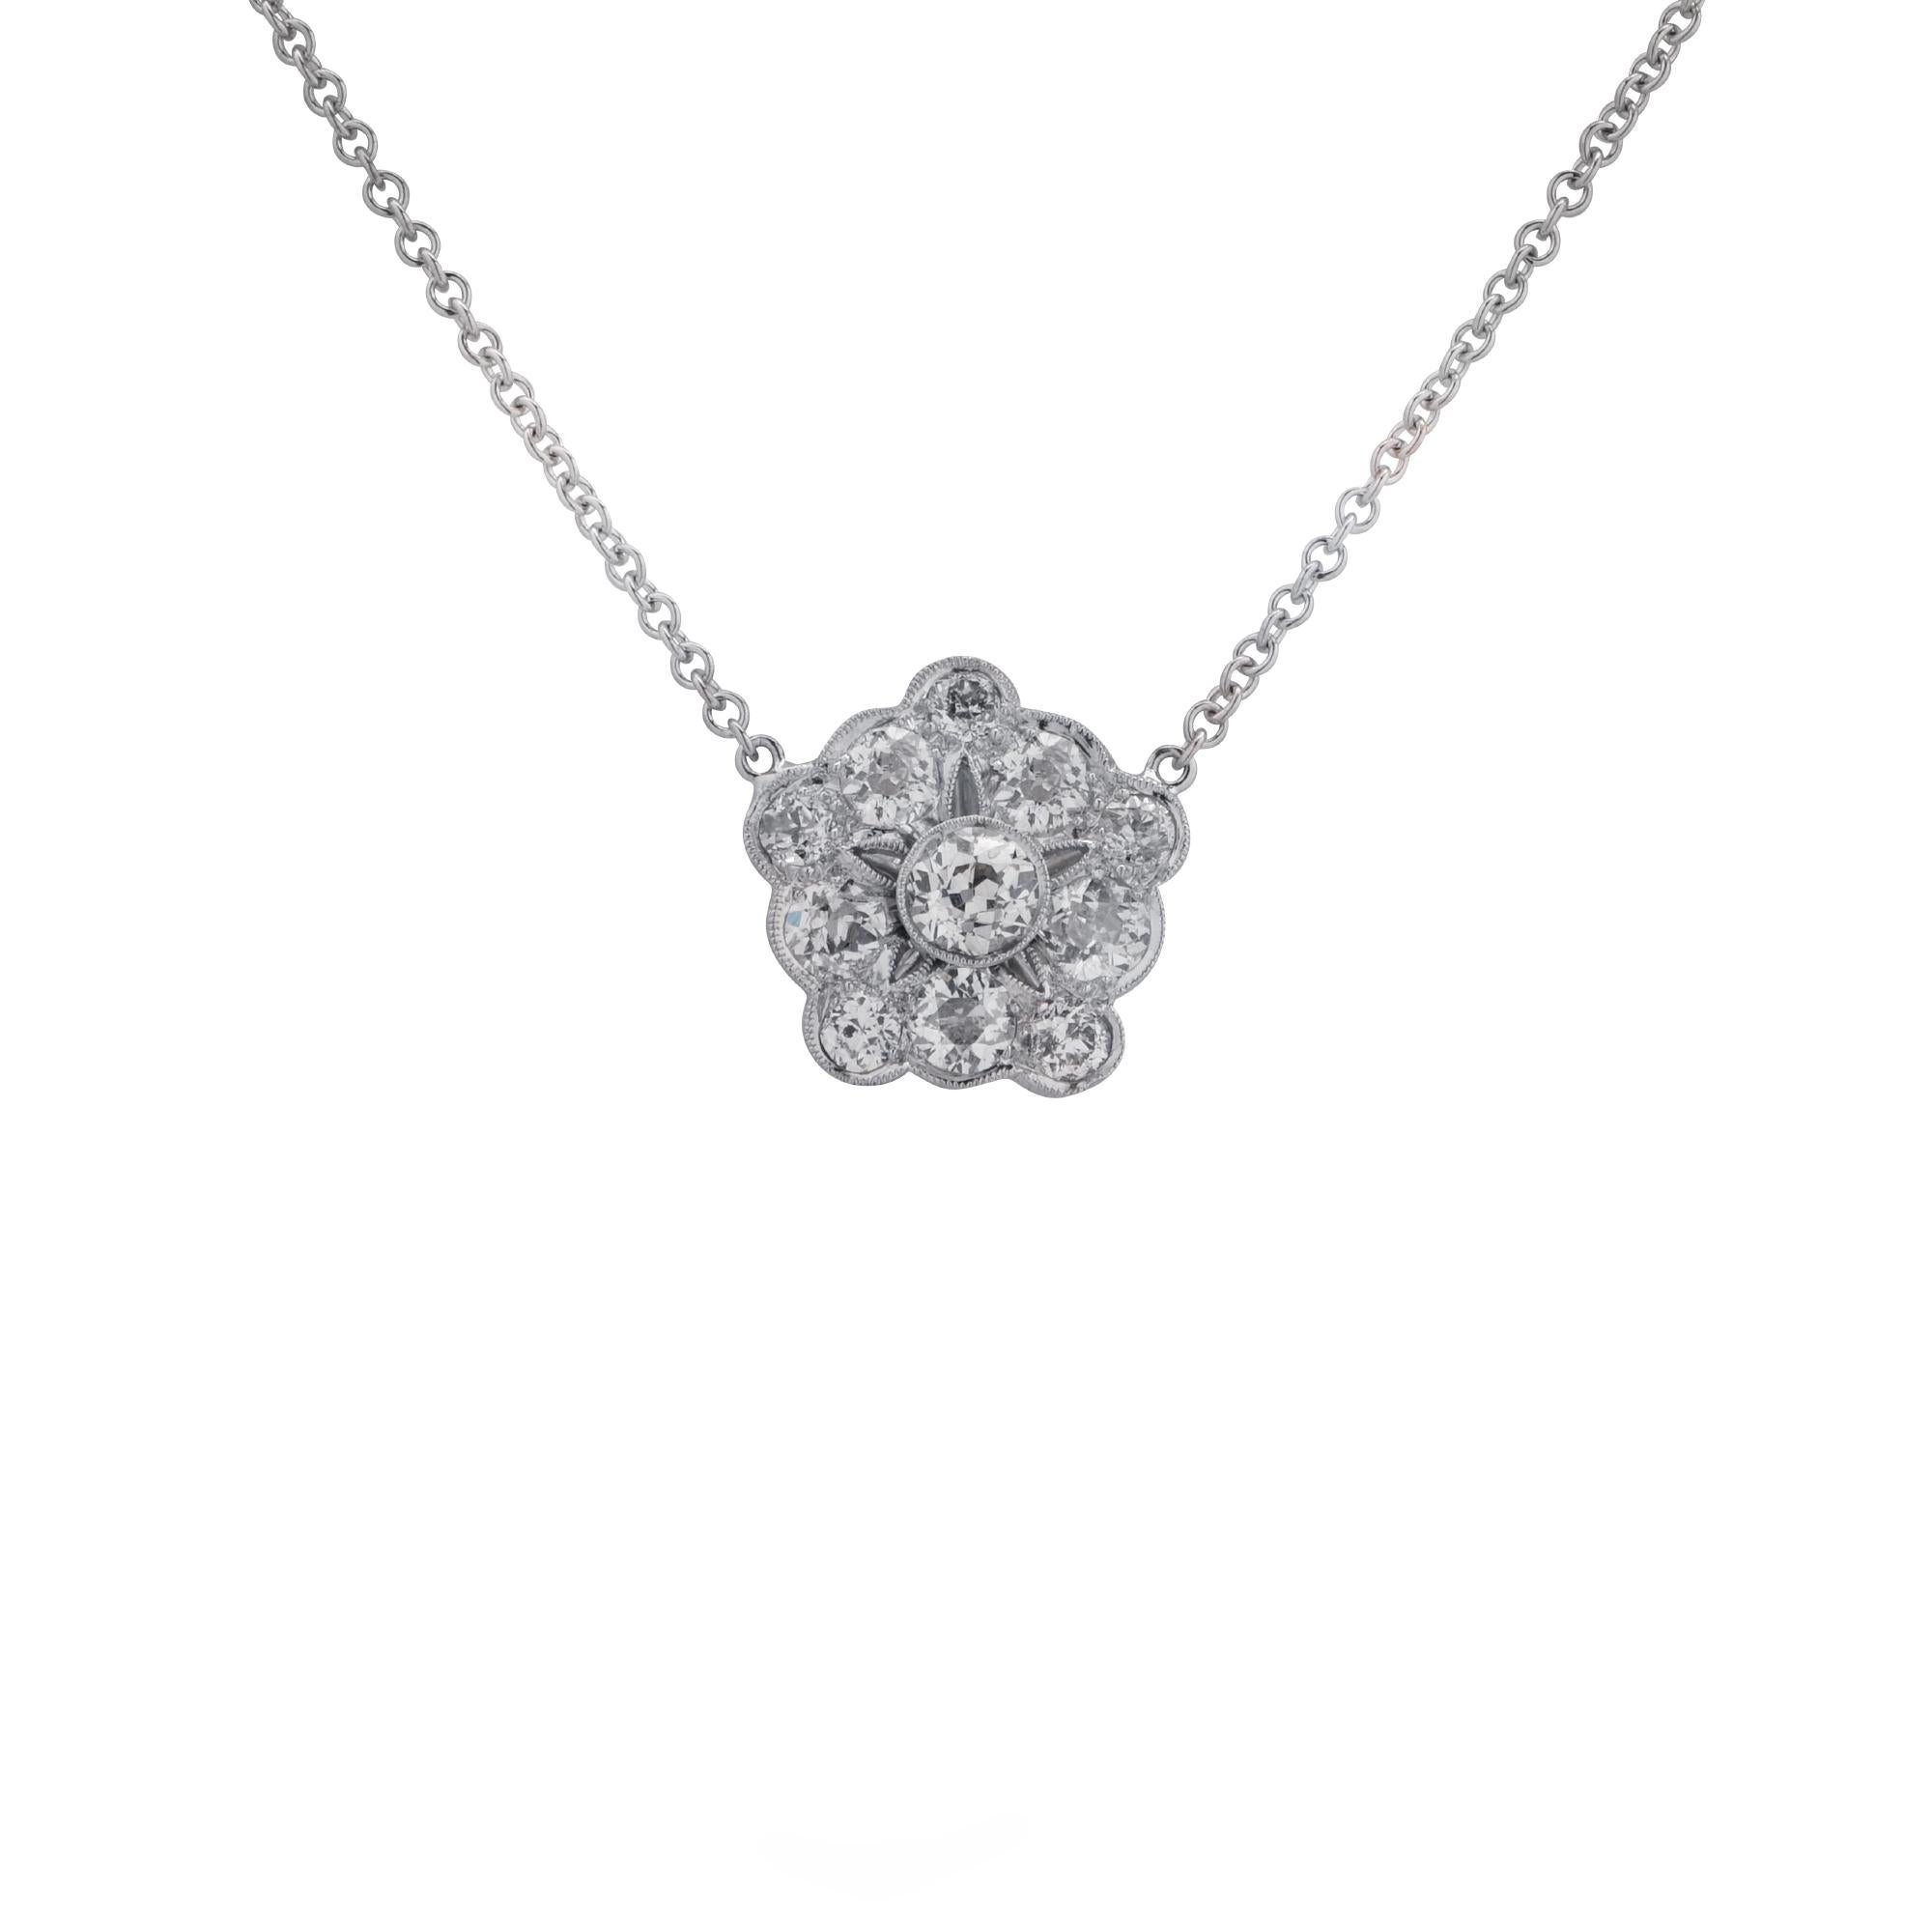 Gorgeous necklace and pendant crafted in platinum and 18 karat white gold featuring 11 European cut diamonds weighing approximately 2 carats total, G-J color VS-SI clarity set in a whimsical flower. The 1 mm chain measures 18.5 inches in length. The